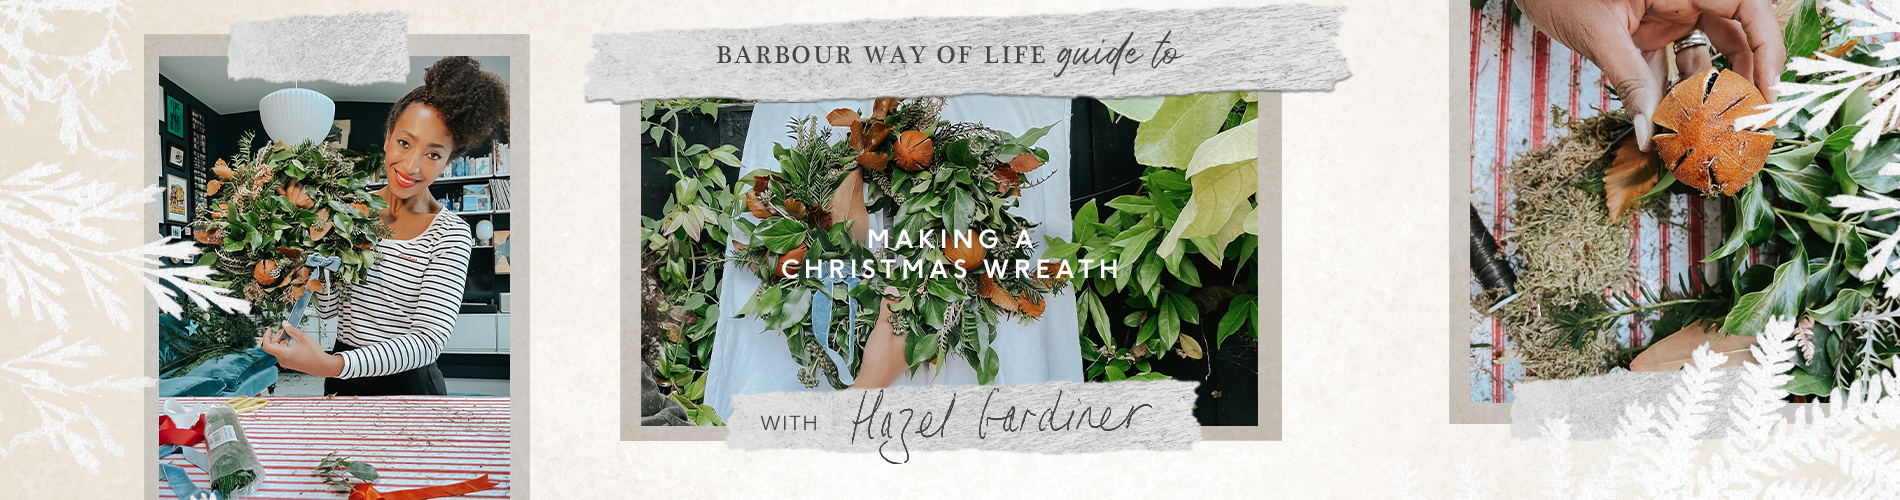 How to Make a Christmas Wreath: Barbour Way of Life Guides